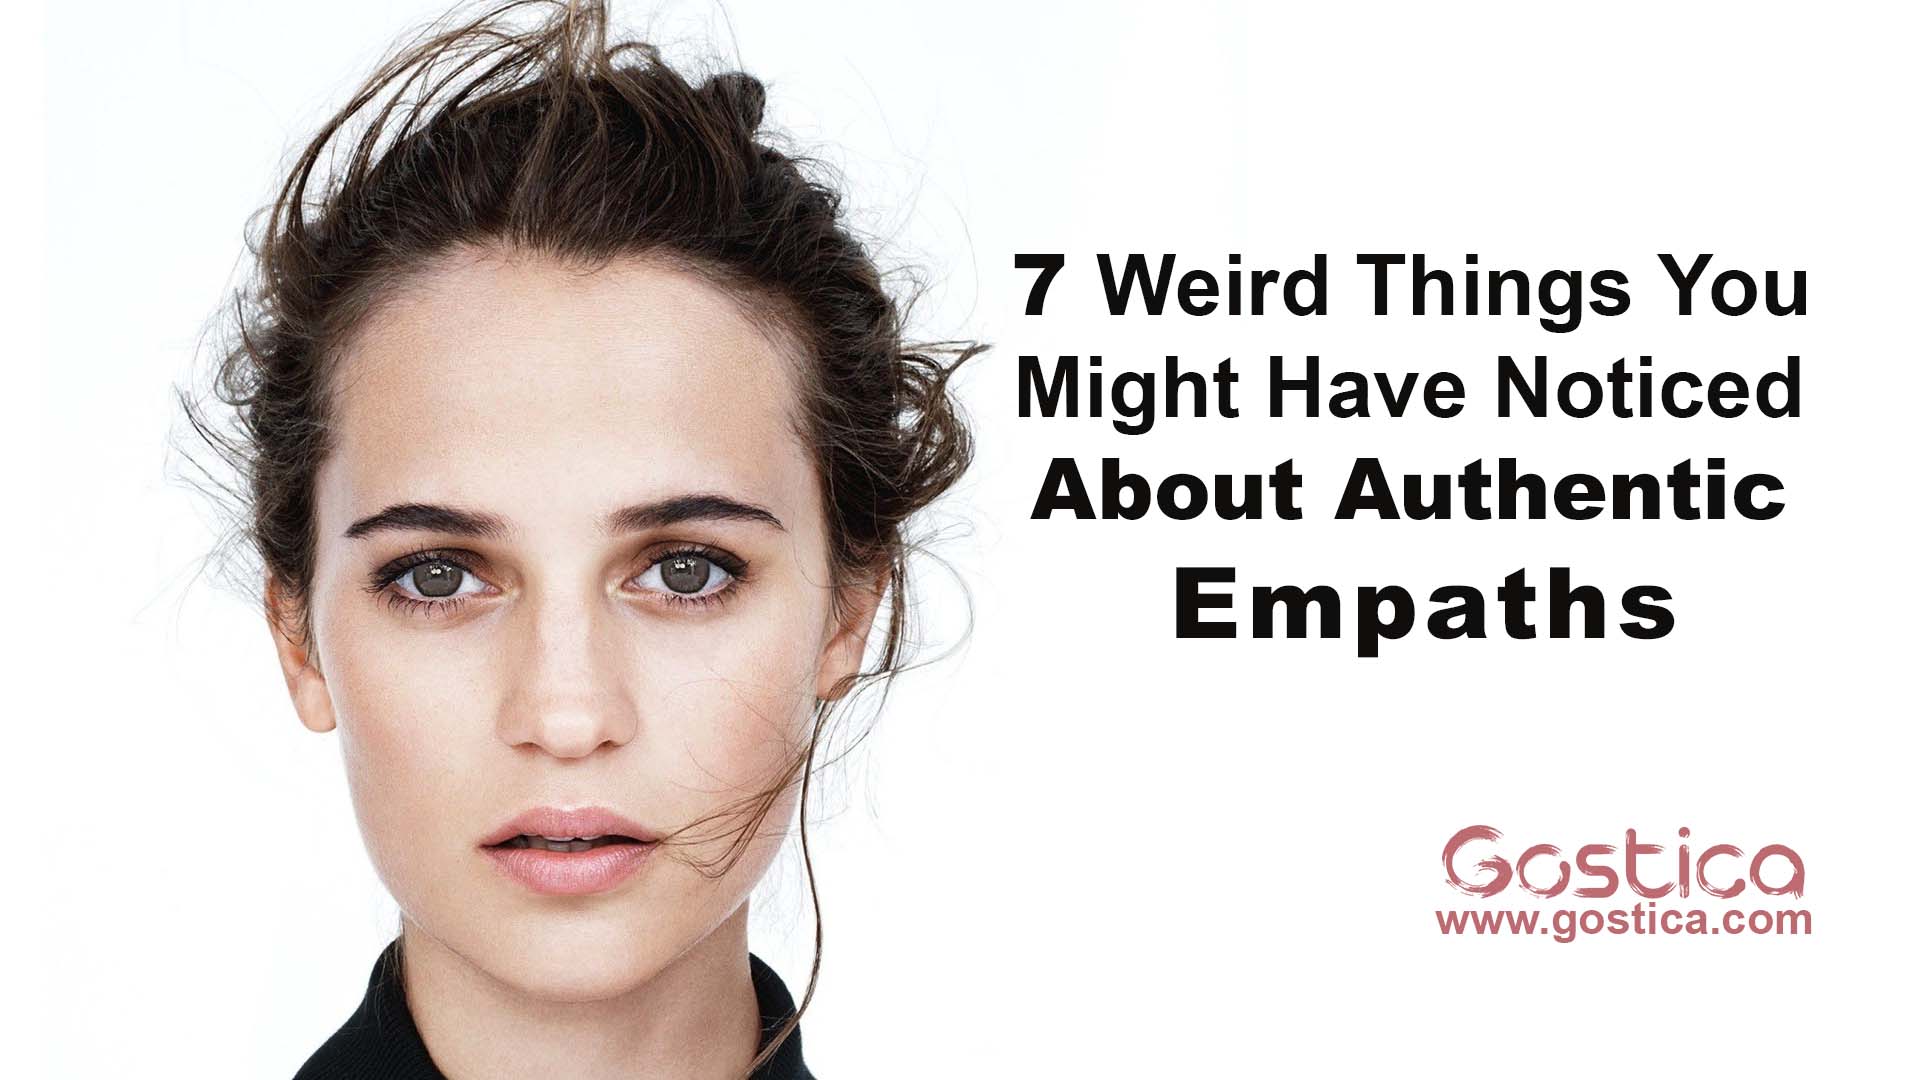 7-Weird-Things-You-Might-Have-Noticed-About-Authentic-Empaths.jpg